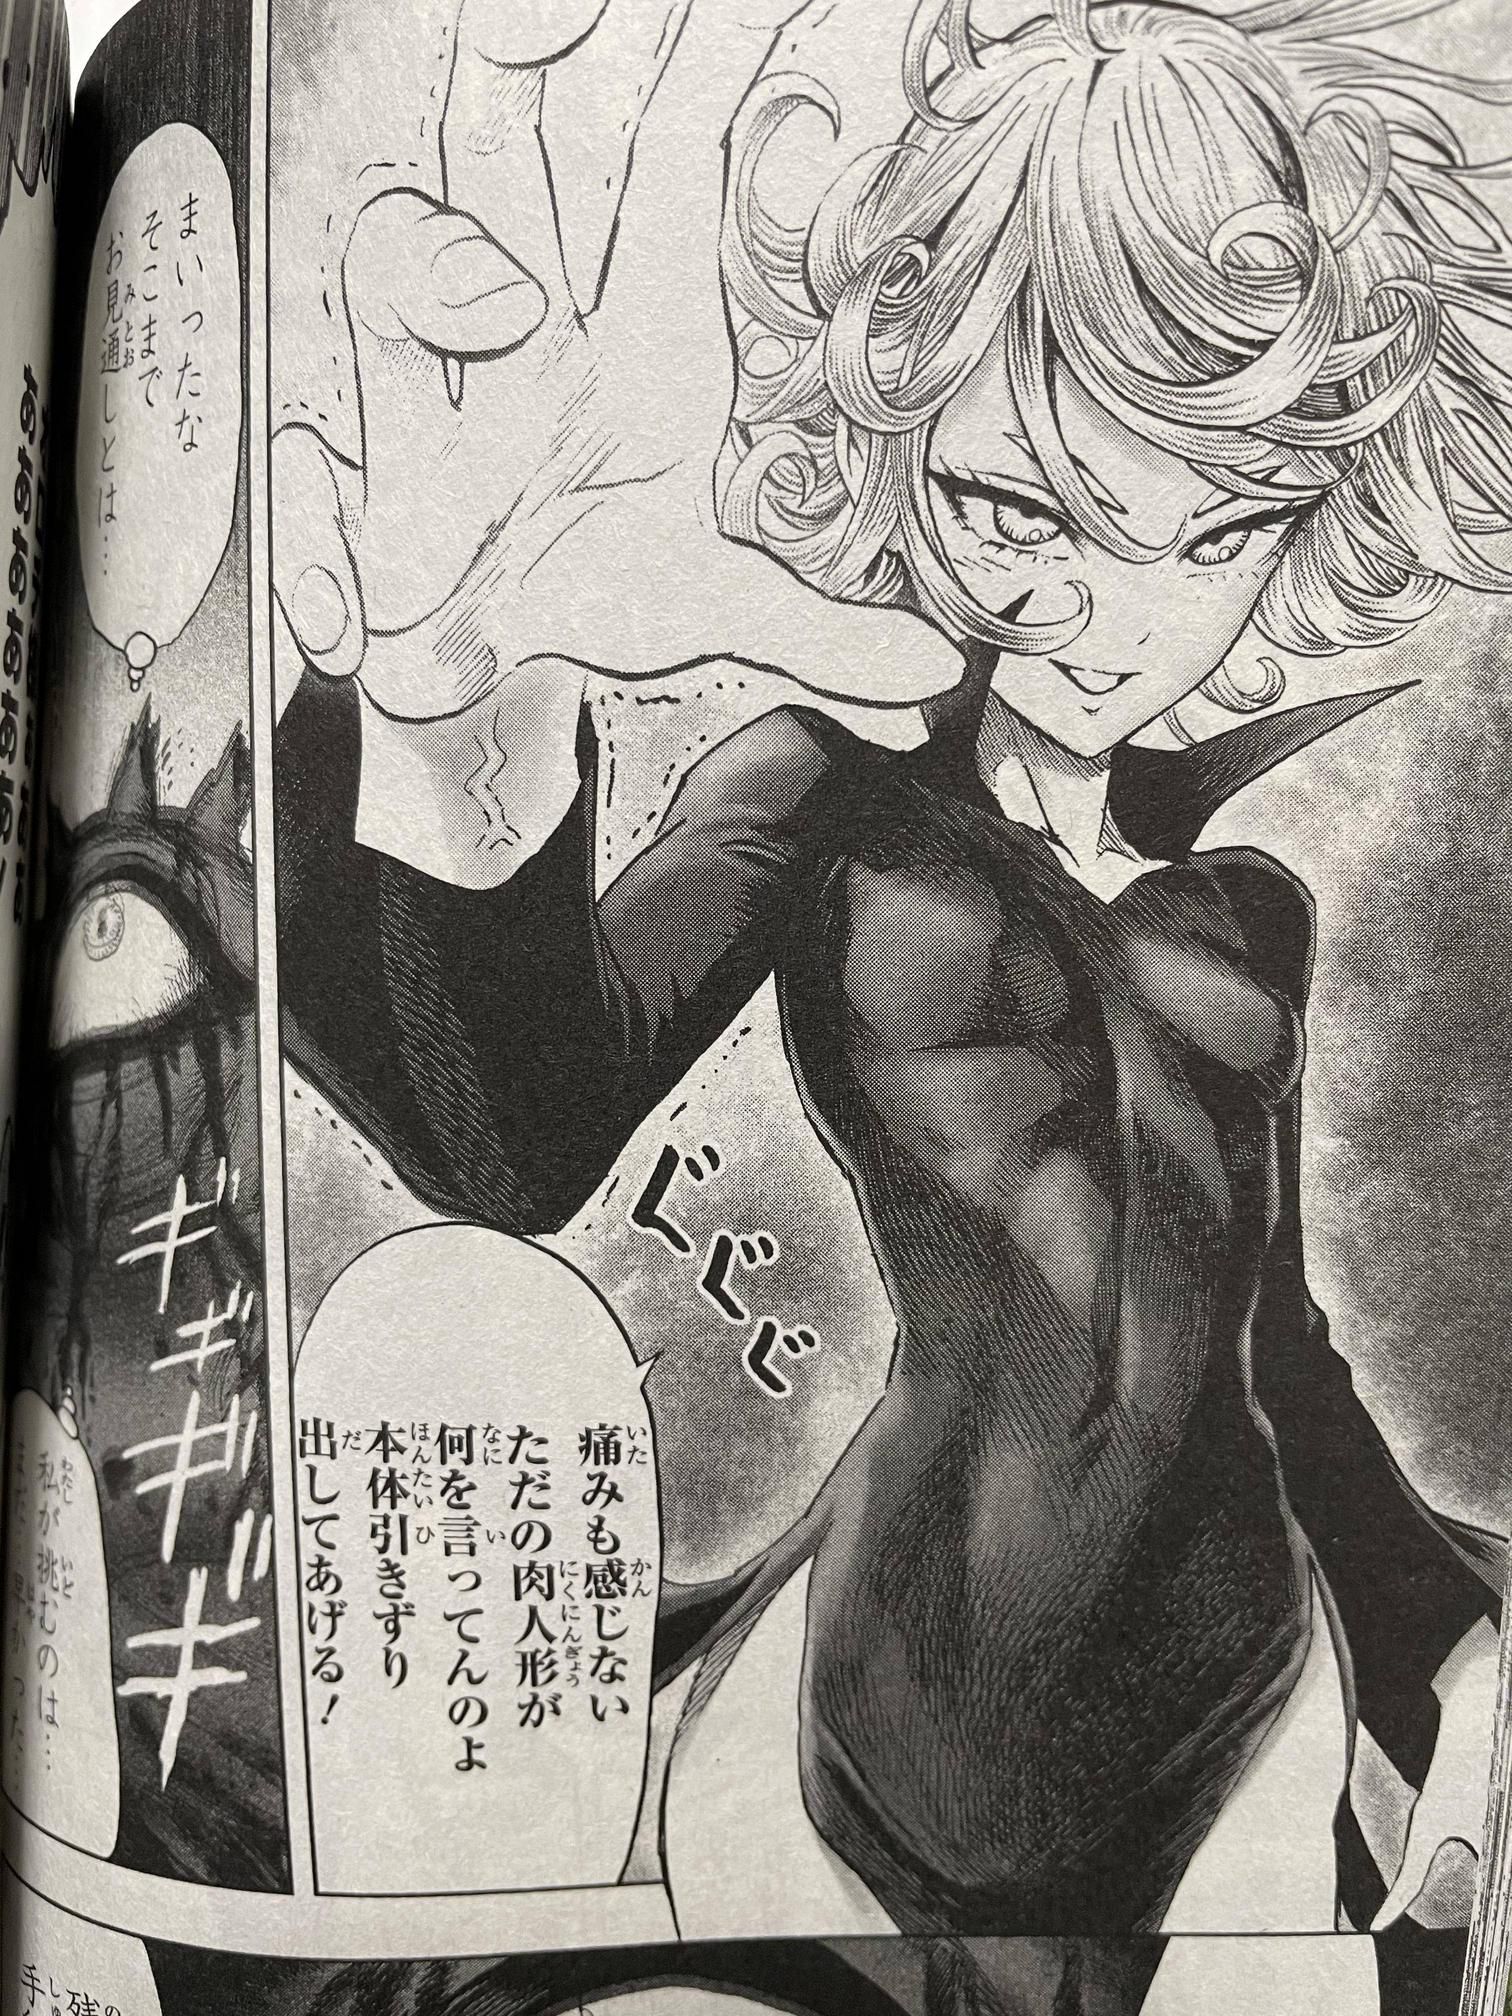 【Image】One-punch man Tatsumaki(28), etch is too 10